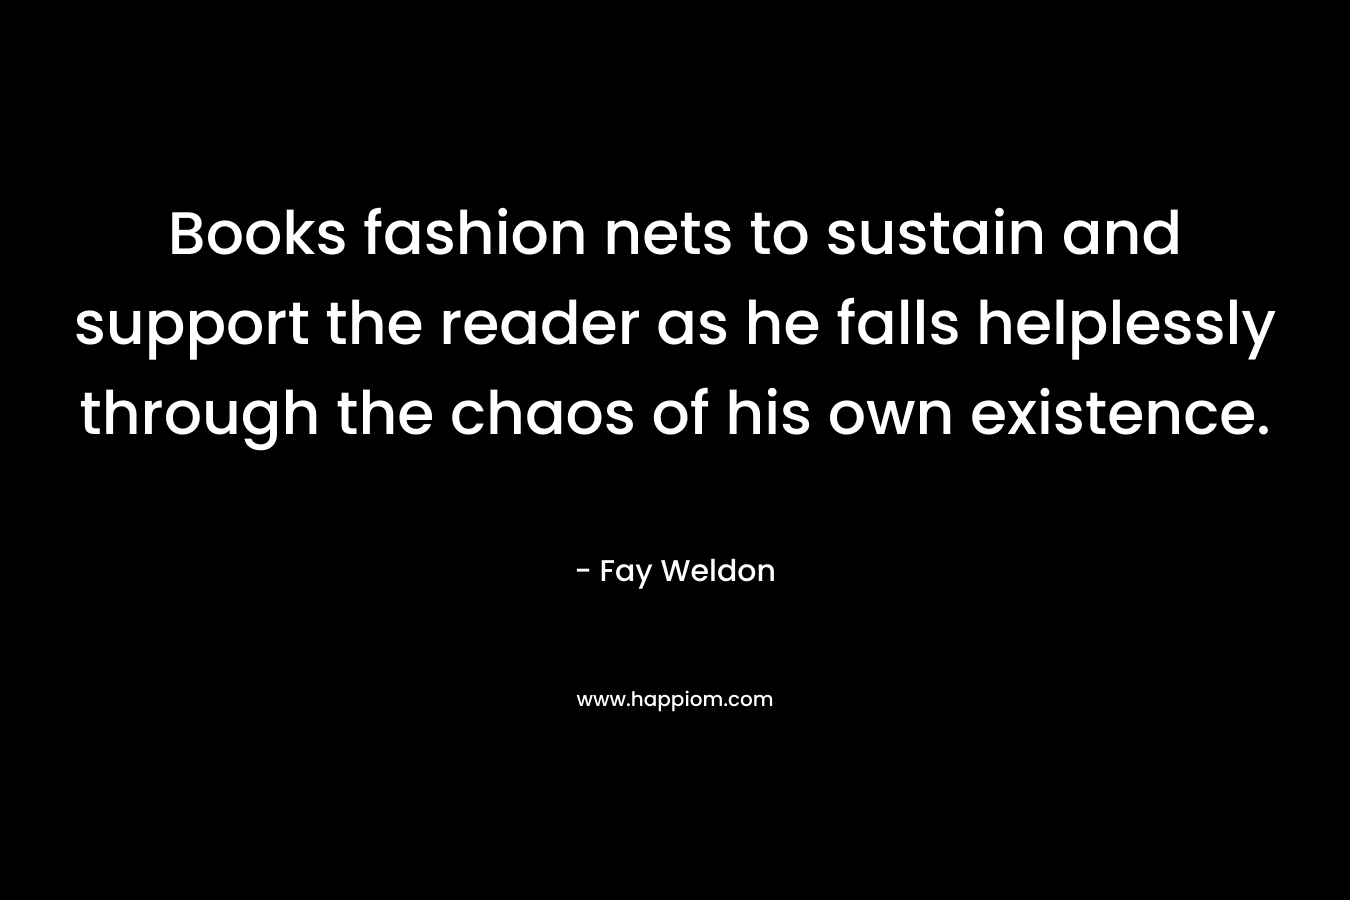 Books fashion nets to sustain and support the reader as he falls helplessly through the chaos of his own existence.